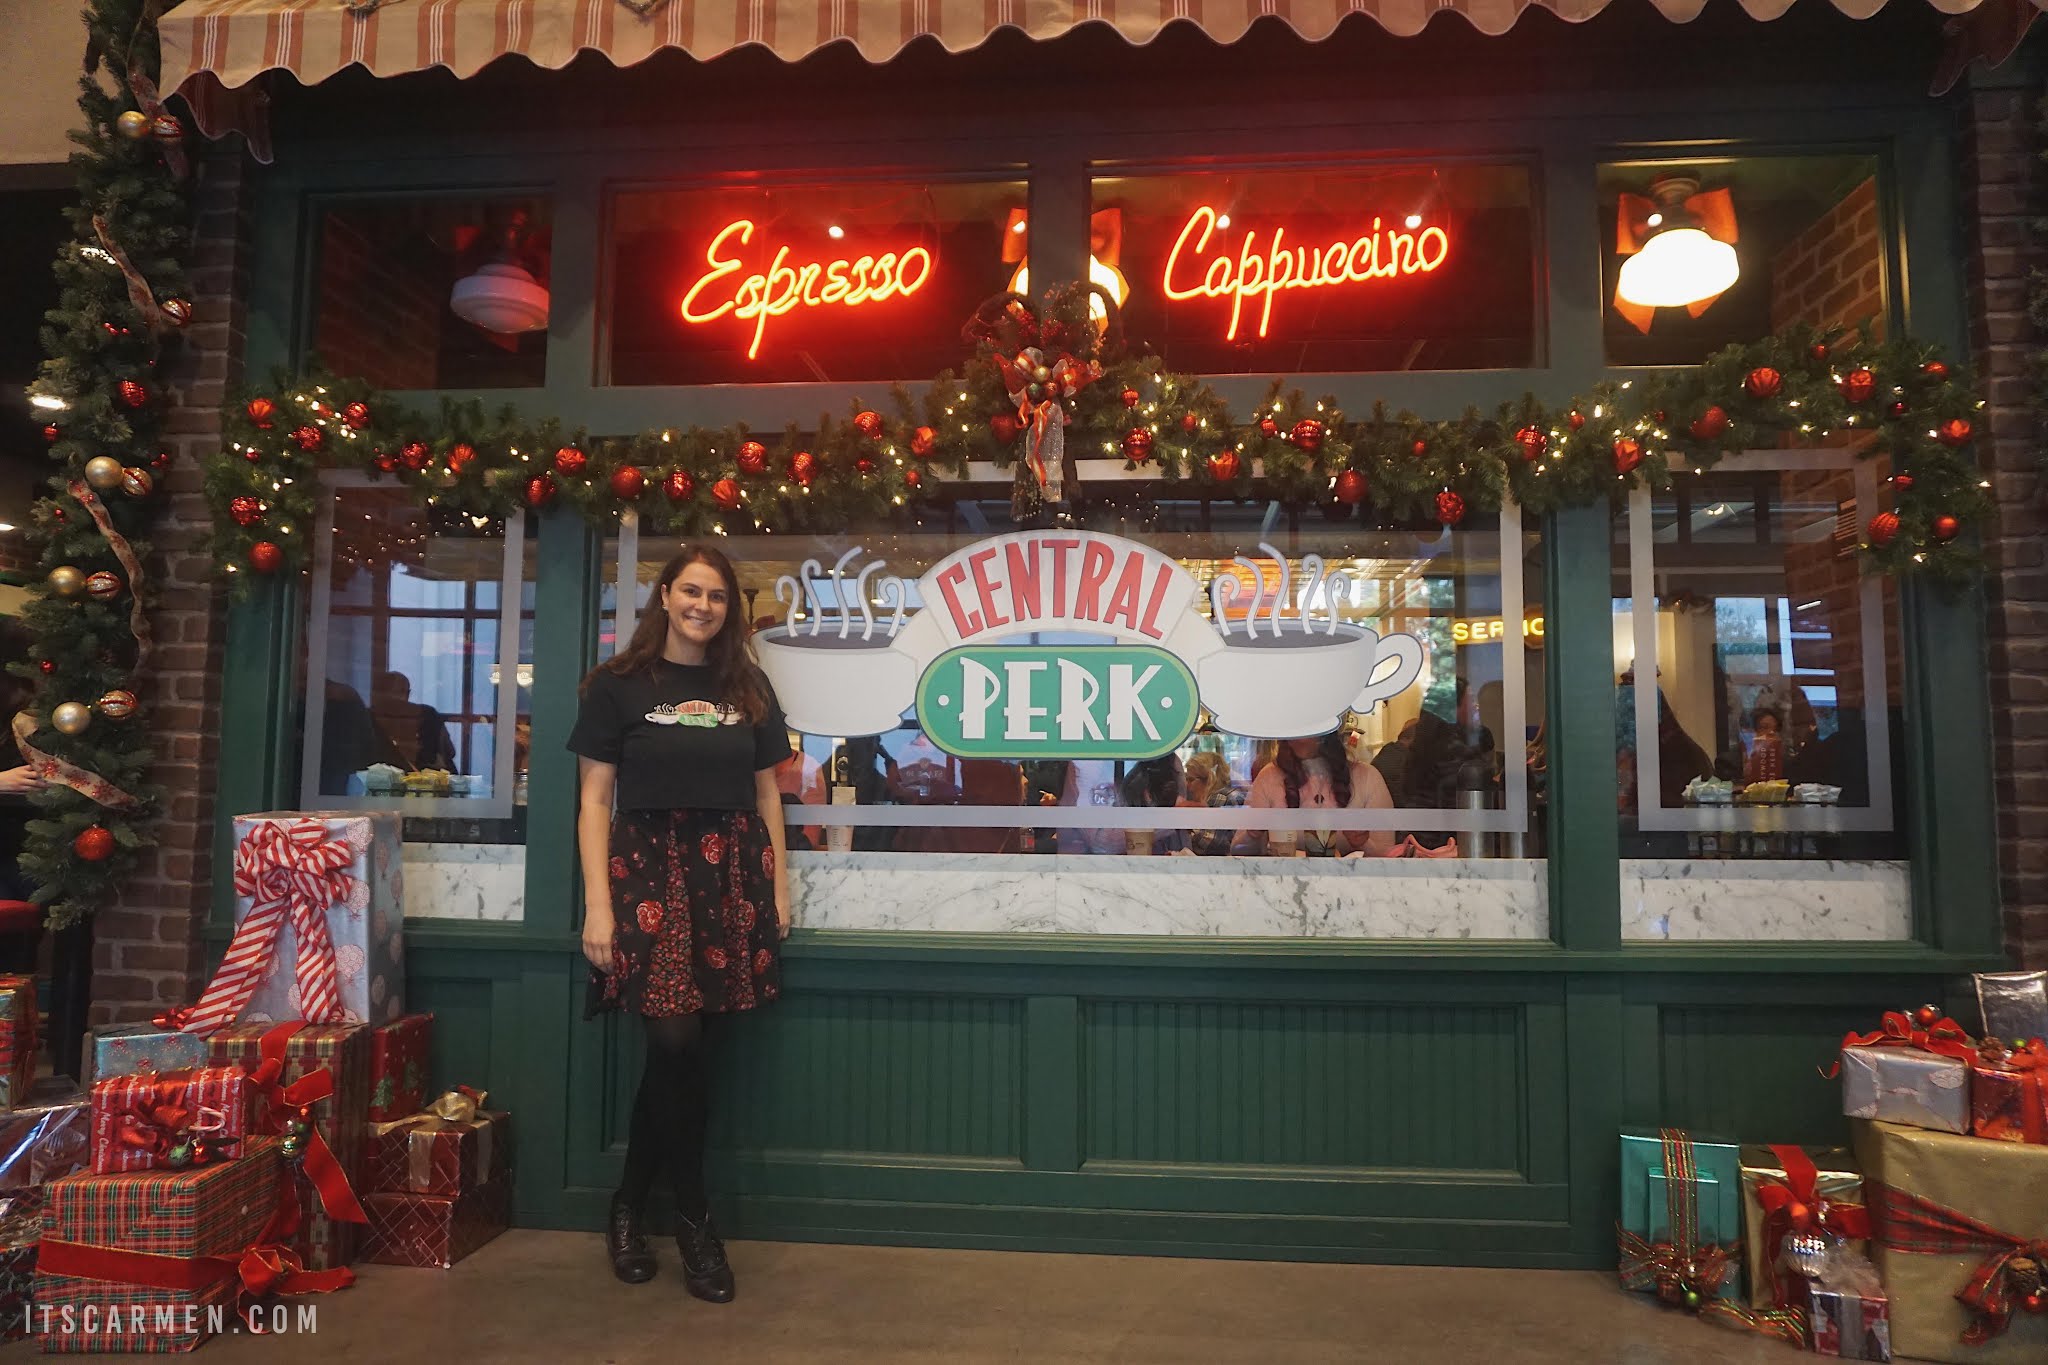 Is Central Perk Cafe From Friends real? Warner Bros Studio Tour Burbank California friends set central perk central perk friends friends studio friends coffee shop where was friends filmed friends central perk friends cafe central perk set